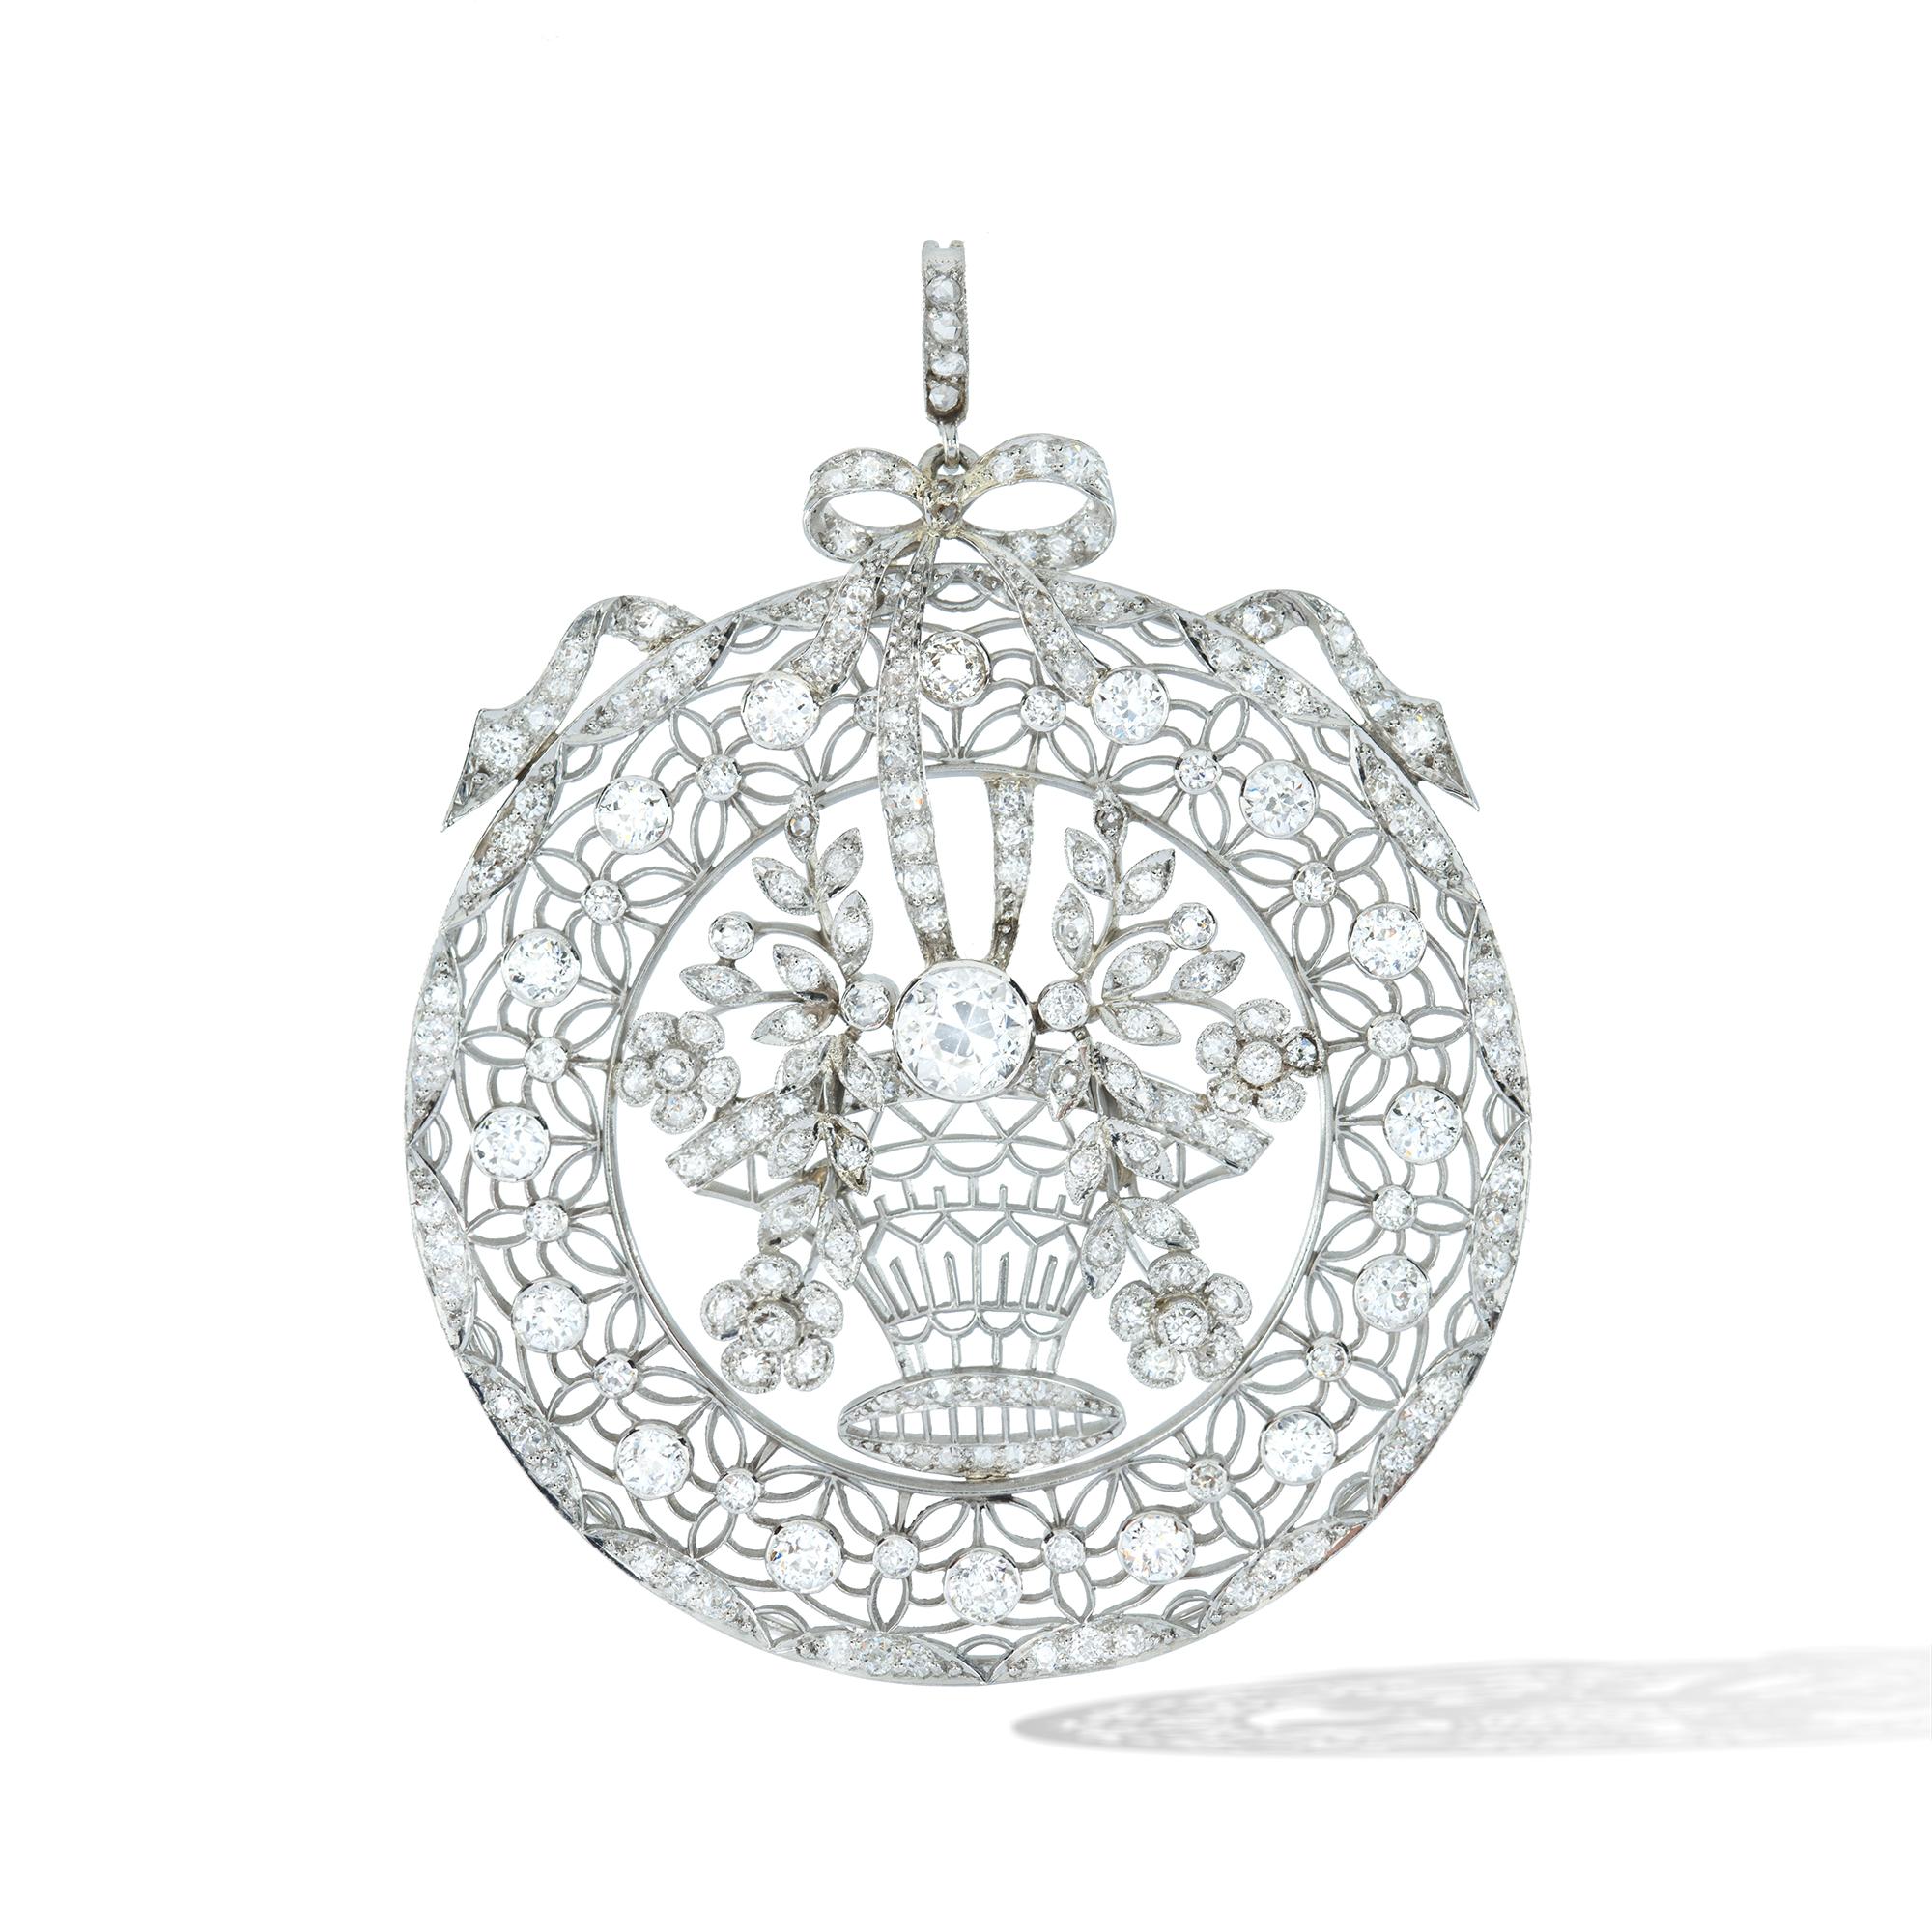 A Belle Epoque French diamond and pearl necklace, the circular open work giardinetto pendant centrally-set with a diamond-set basket with two diamond-set floral designed garlands surrounded by a diamond-set floral motif frame, all suspended by a